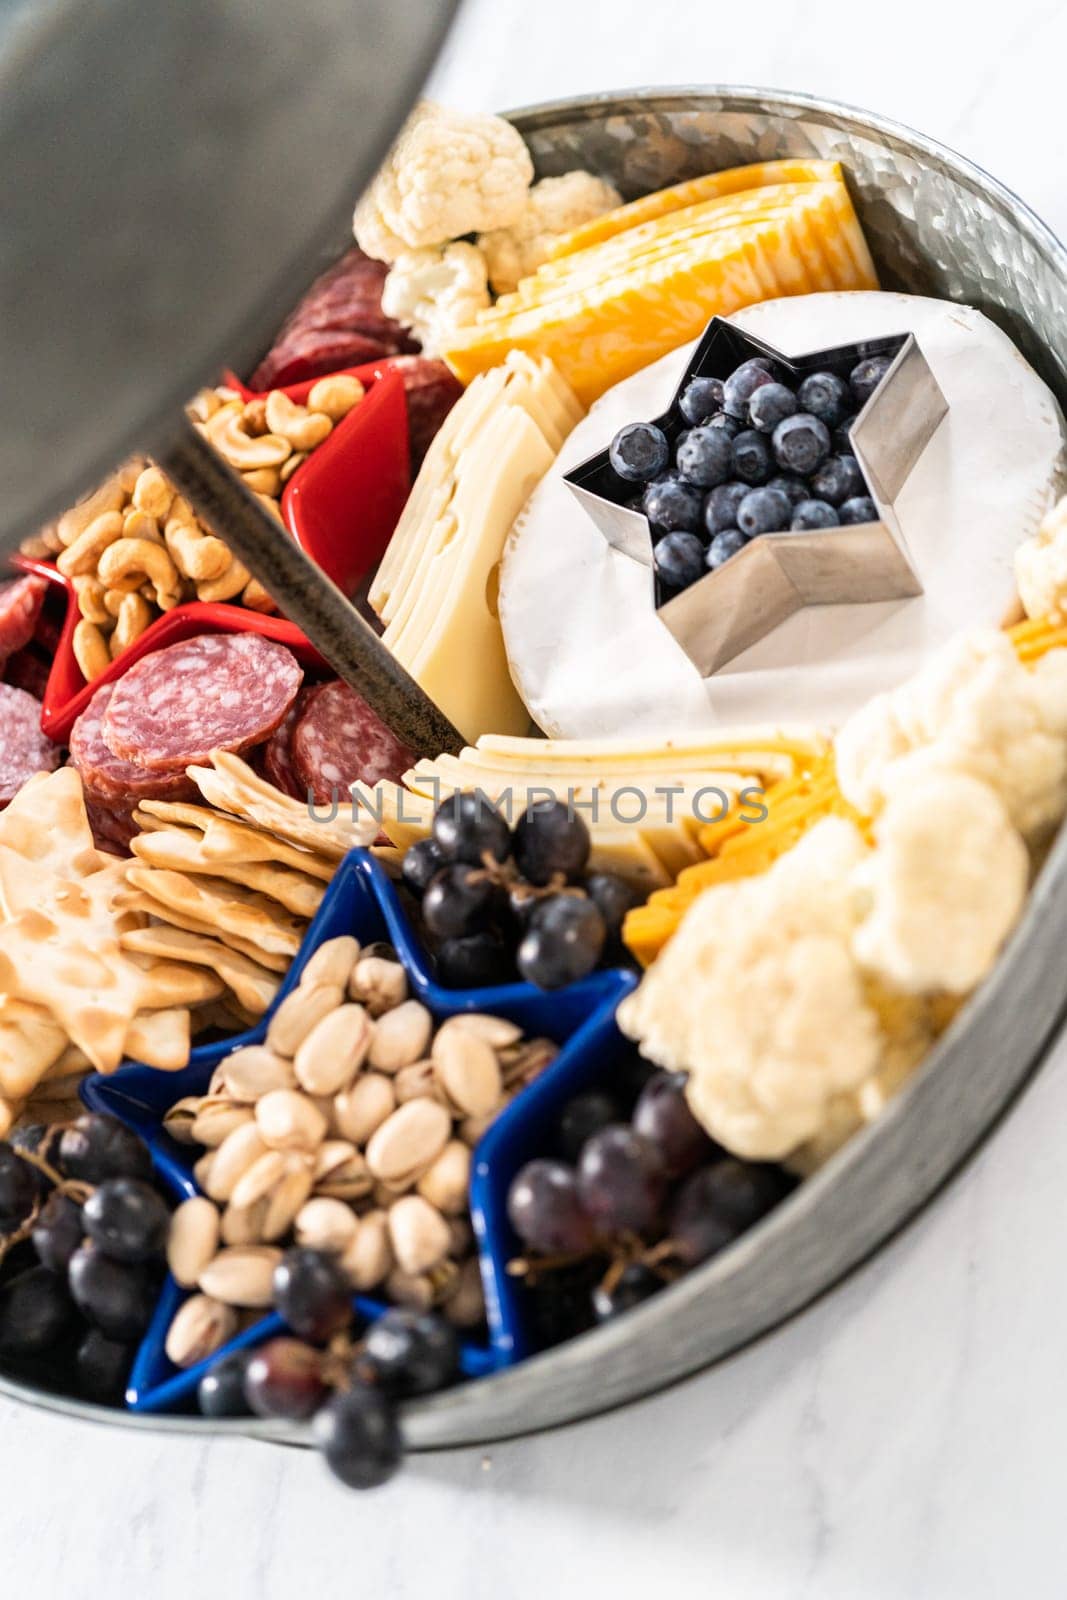 July 4th charcuterie board on a two-tiered serving metal stand filled with cheese, crackers, salami, and fresh fruits